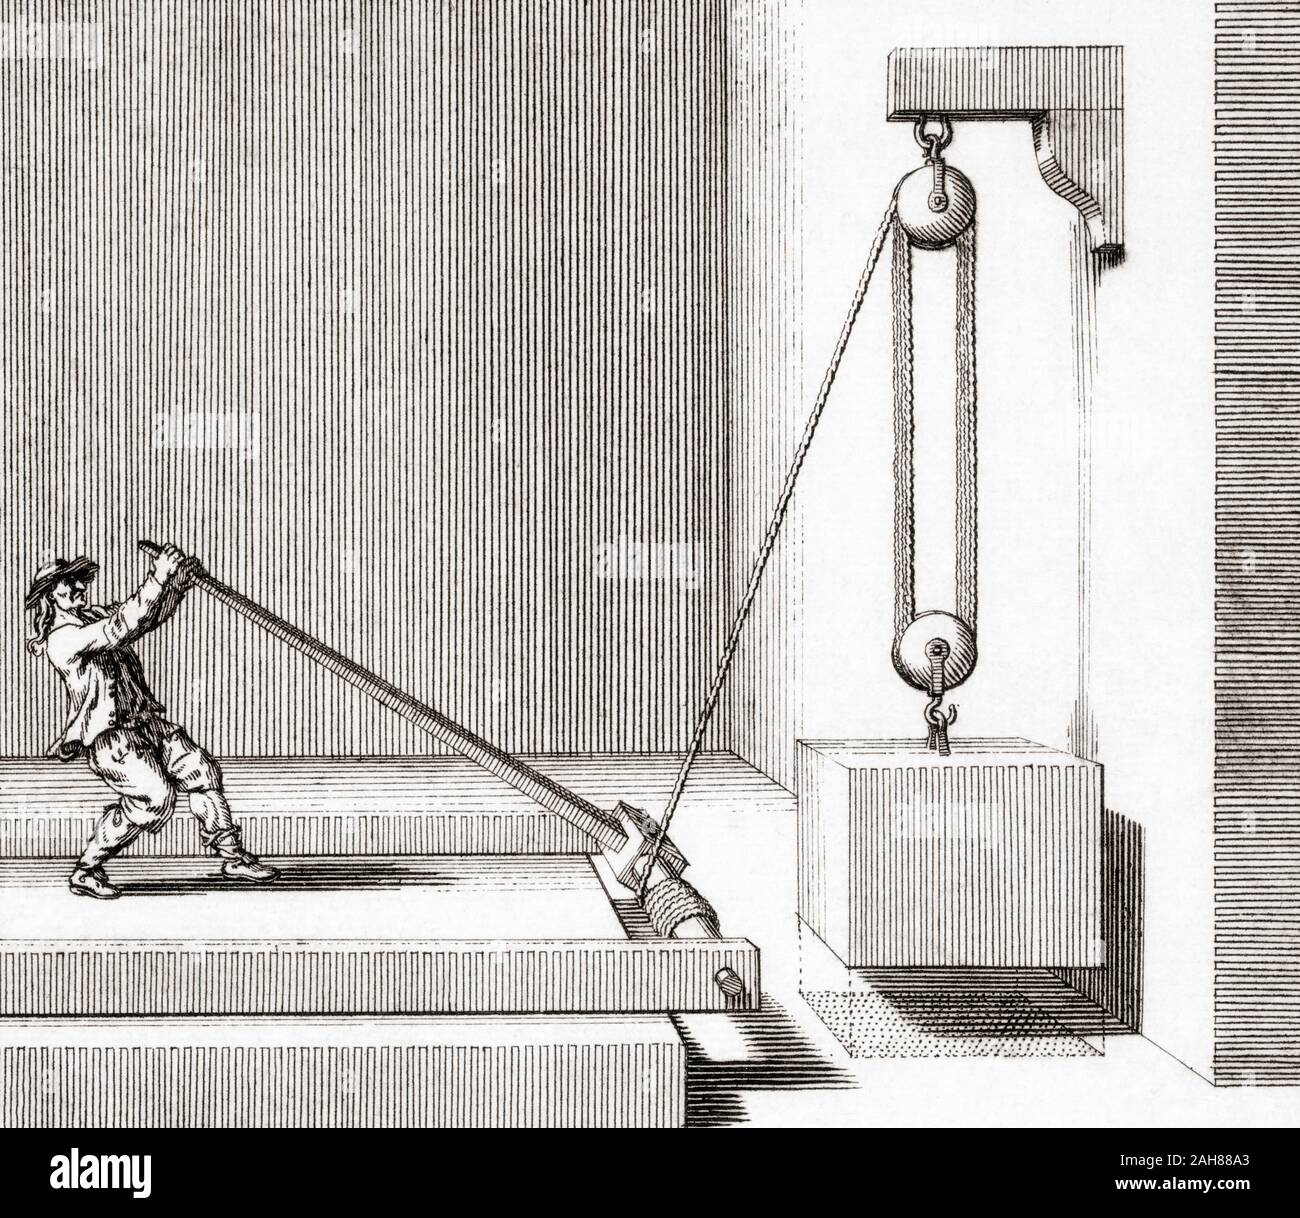 Man operating a pulley with a lever and fulcrum.  After an 18th century work. Stock Photo